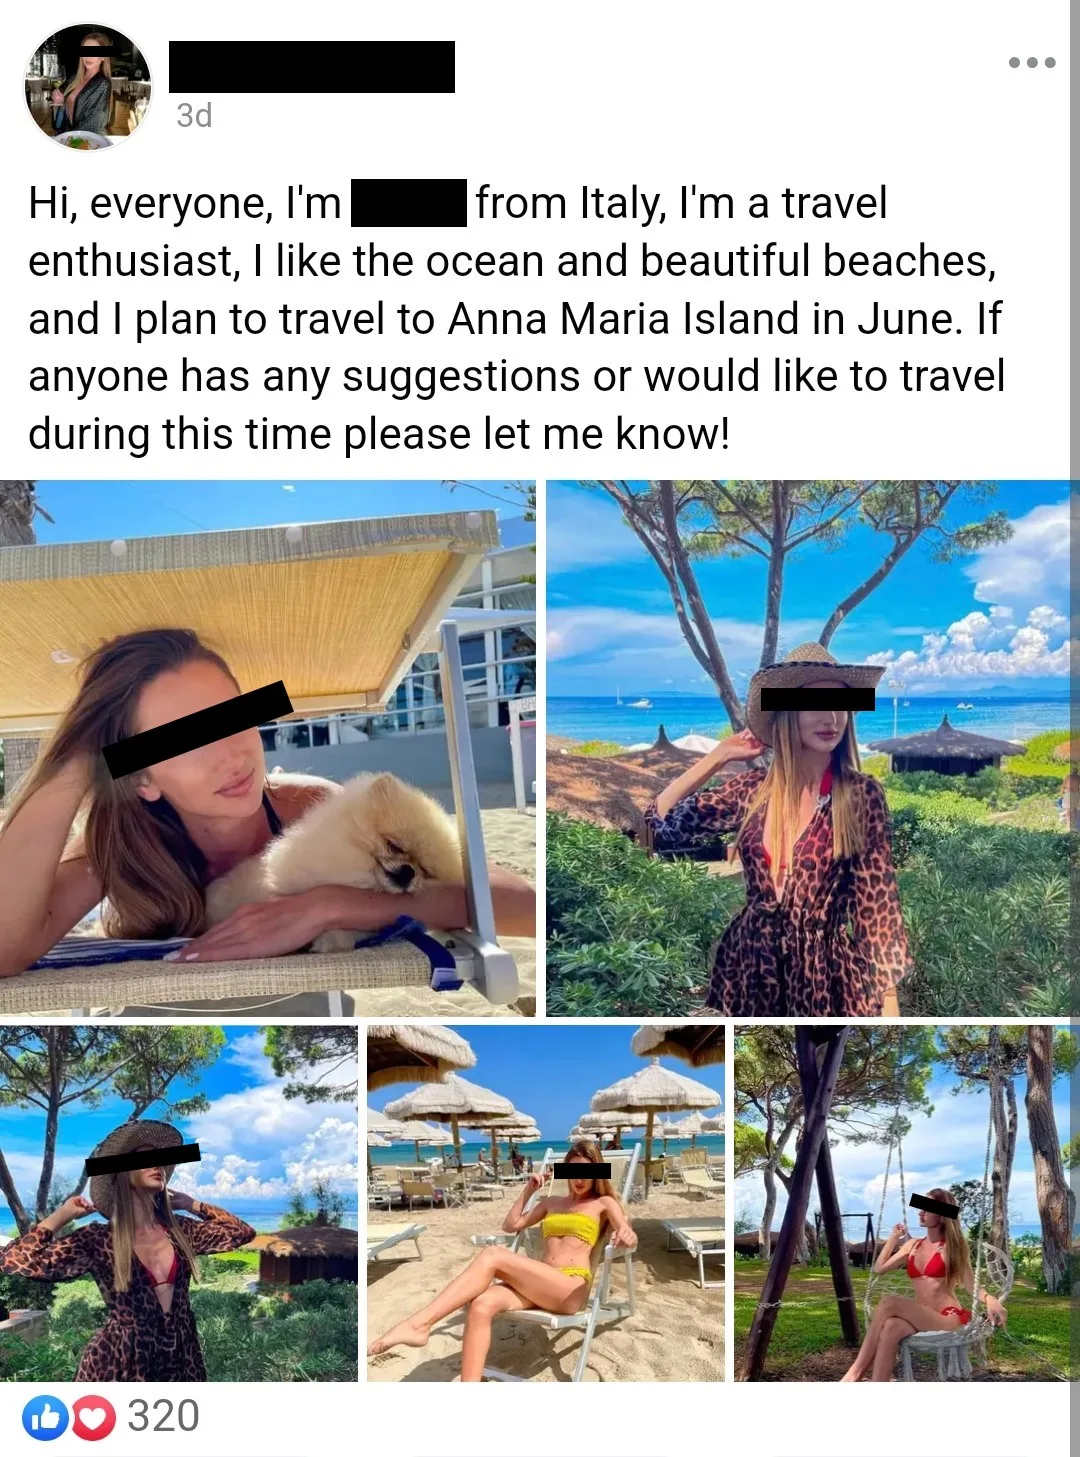 A member of a Facebook travel group looking for suggestions and potential travel buddies 